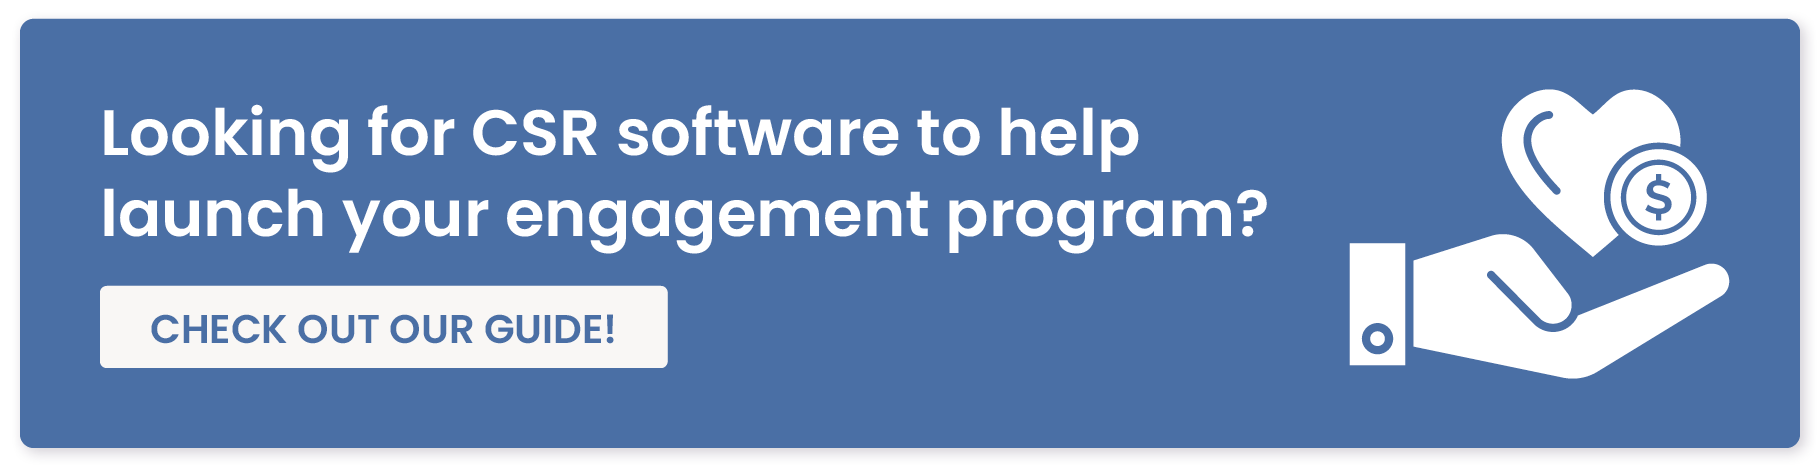 Looking for CSR software to help launch your engagement program? Check out our guide!